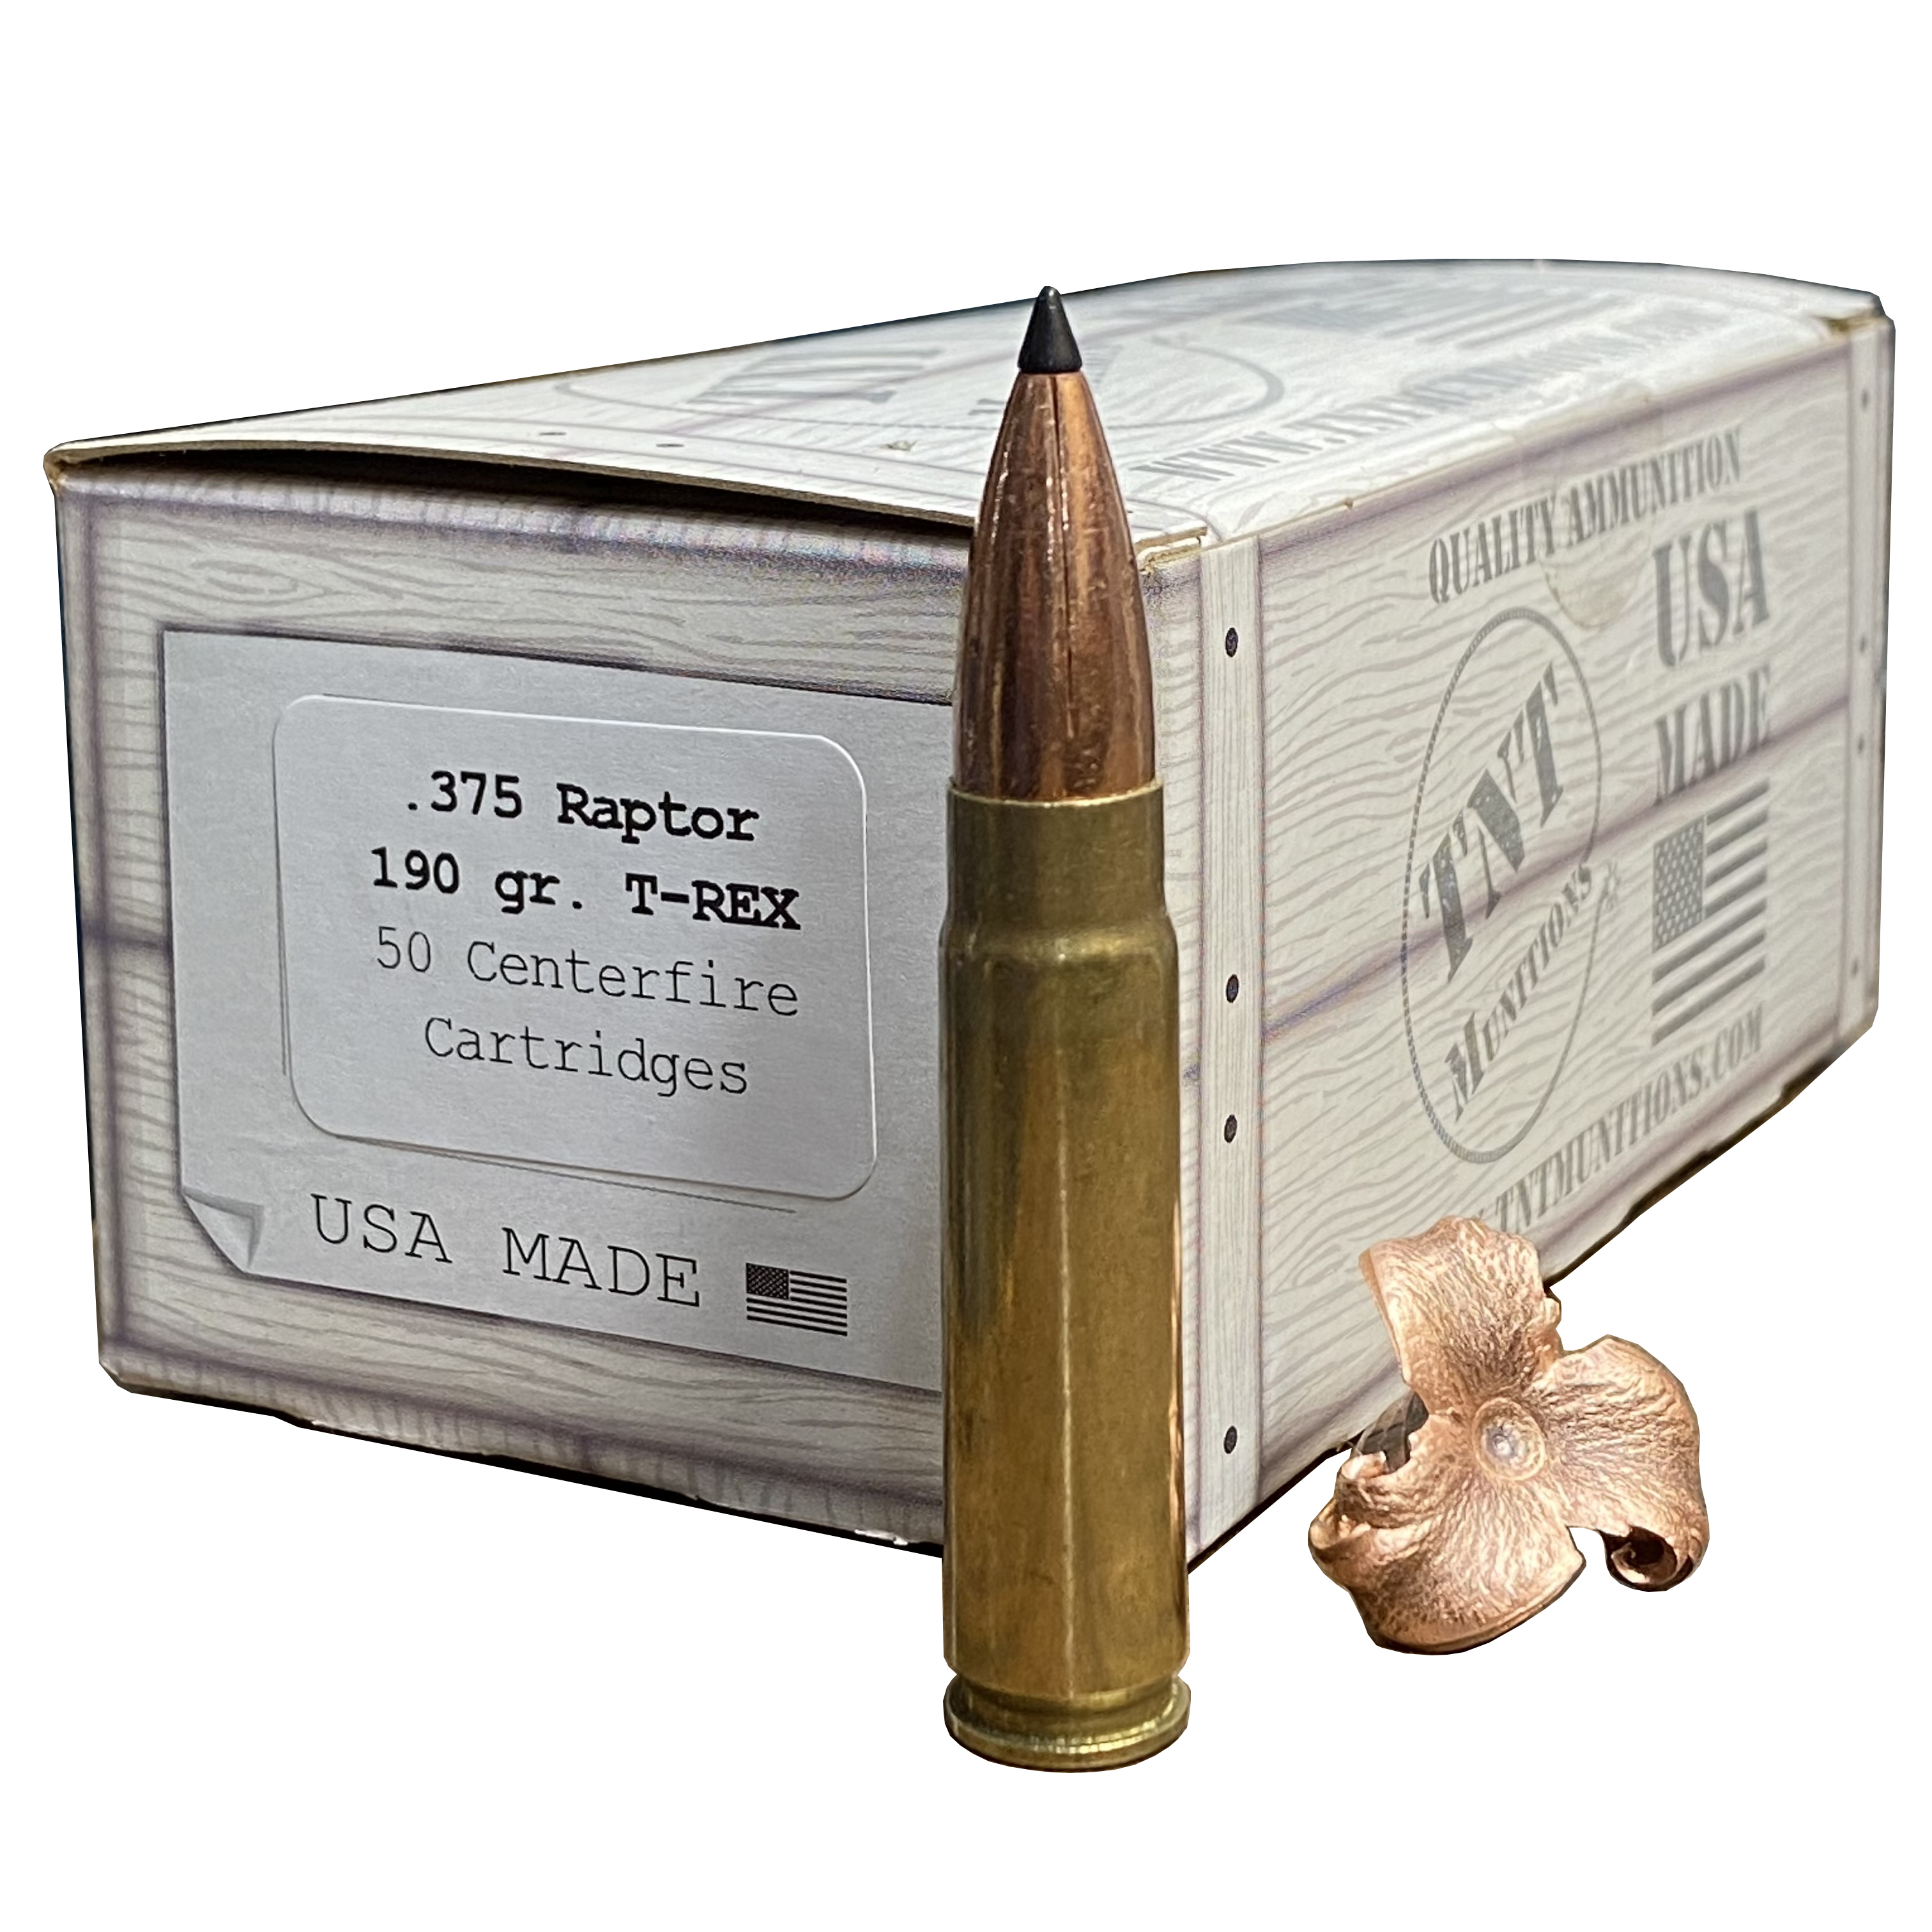 .375 Raptor 190 gr. Maker T-REX. MEMORIAL DAY SALE! THROUGH MAY 29TH ONLY - SHIPS NBD  - (LEAD-FREE)